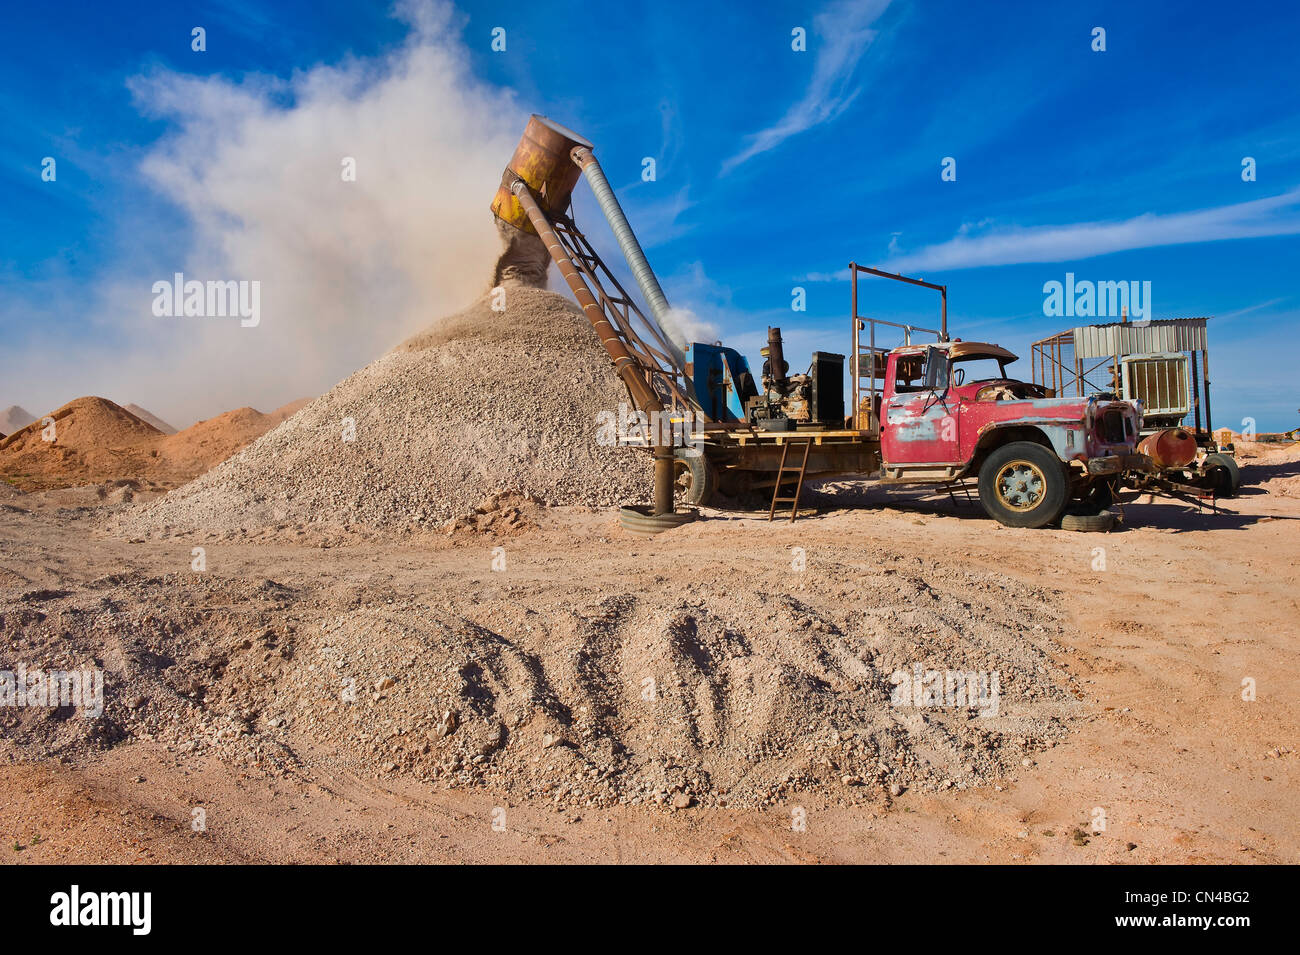 Australia, South Australia, Coober Pedy, a blower, a truck for opal mining symbol of Coober Pedy Stock Photo